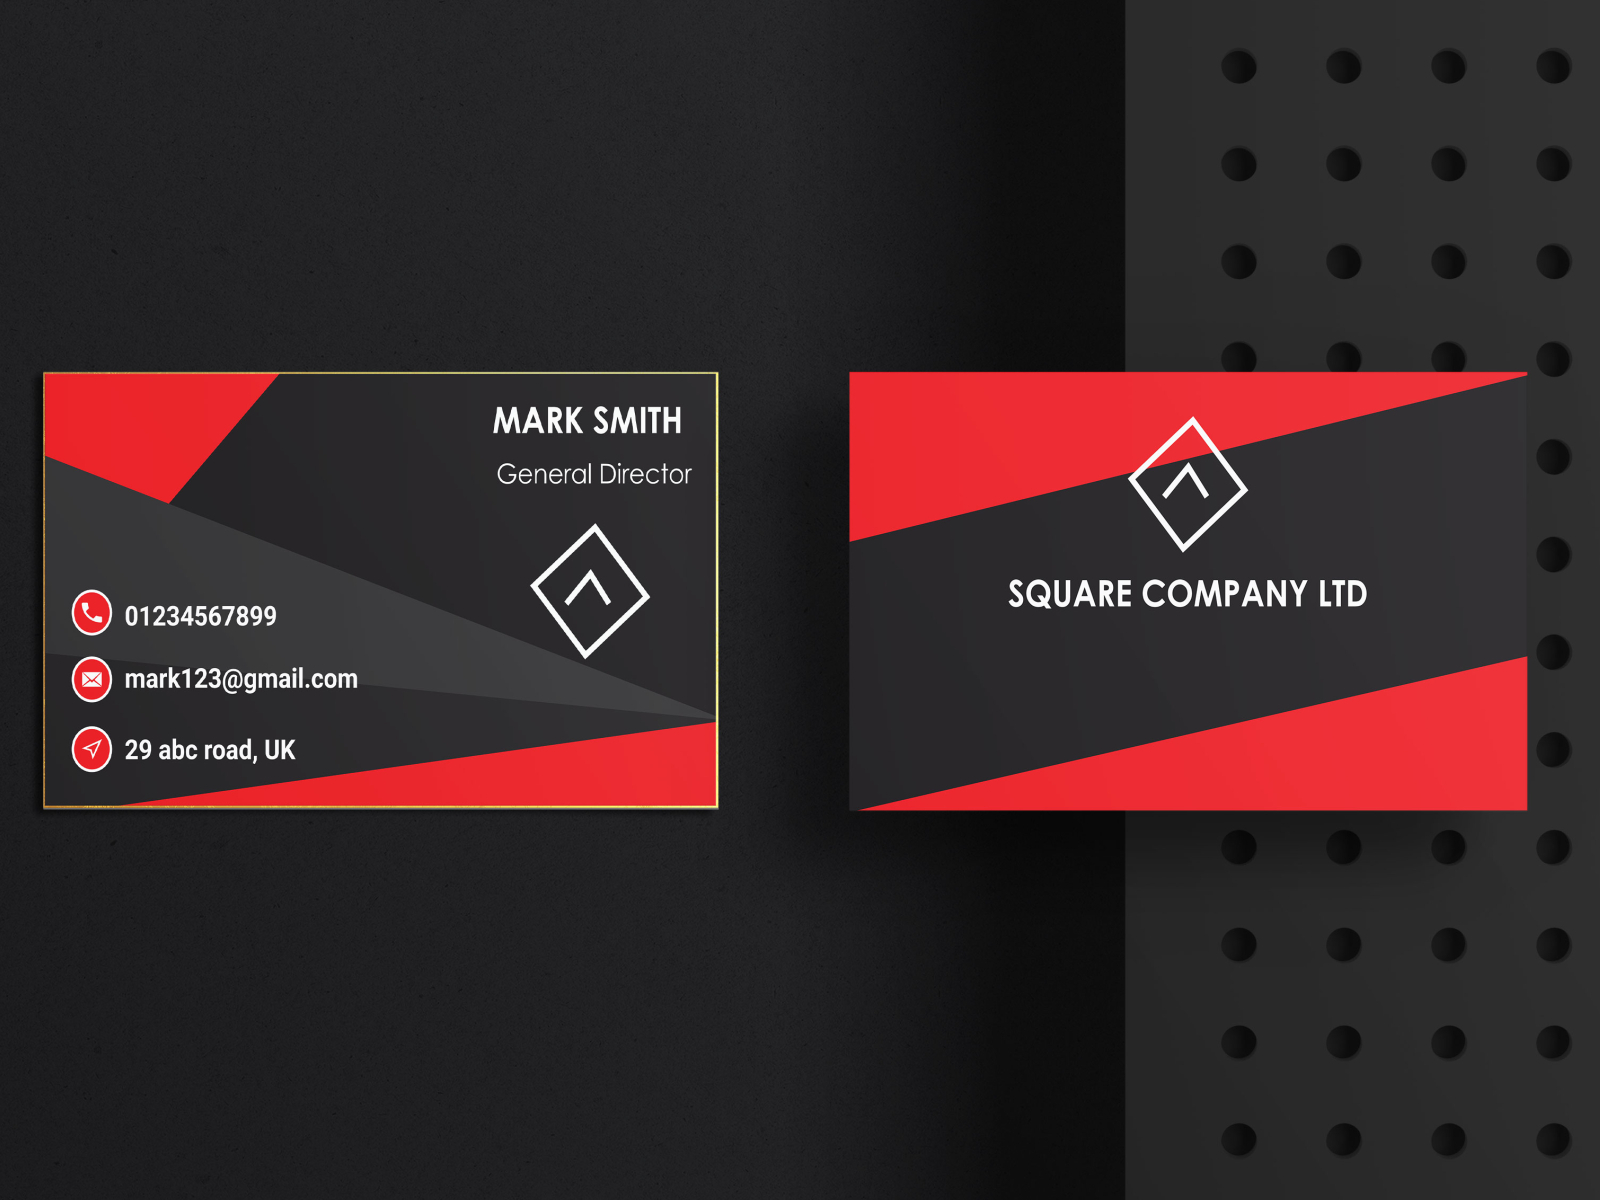 Business Card Design with mockup by Arutars IT Farm on Dribbble